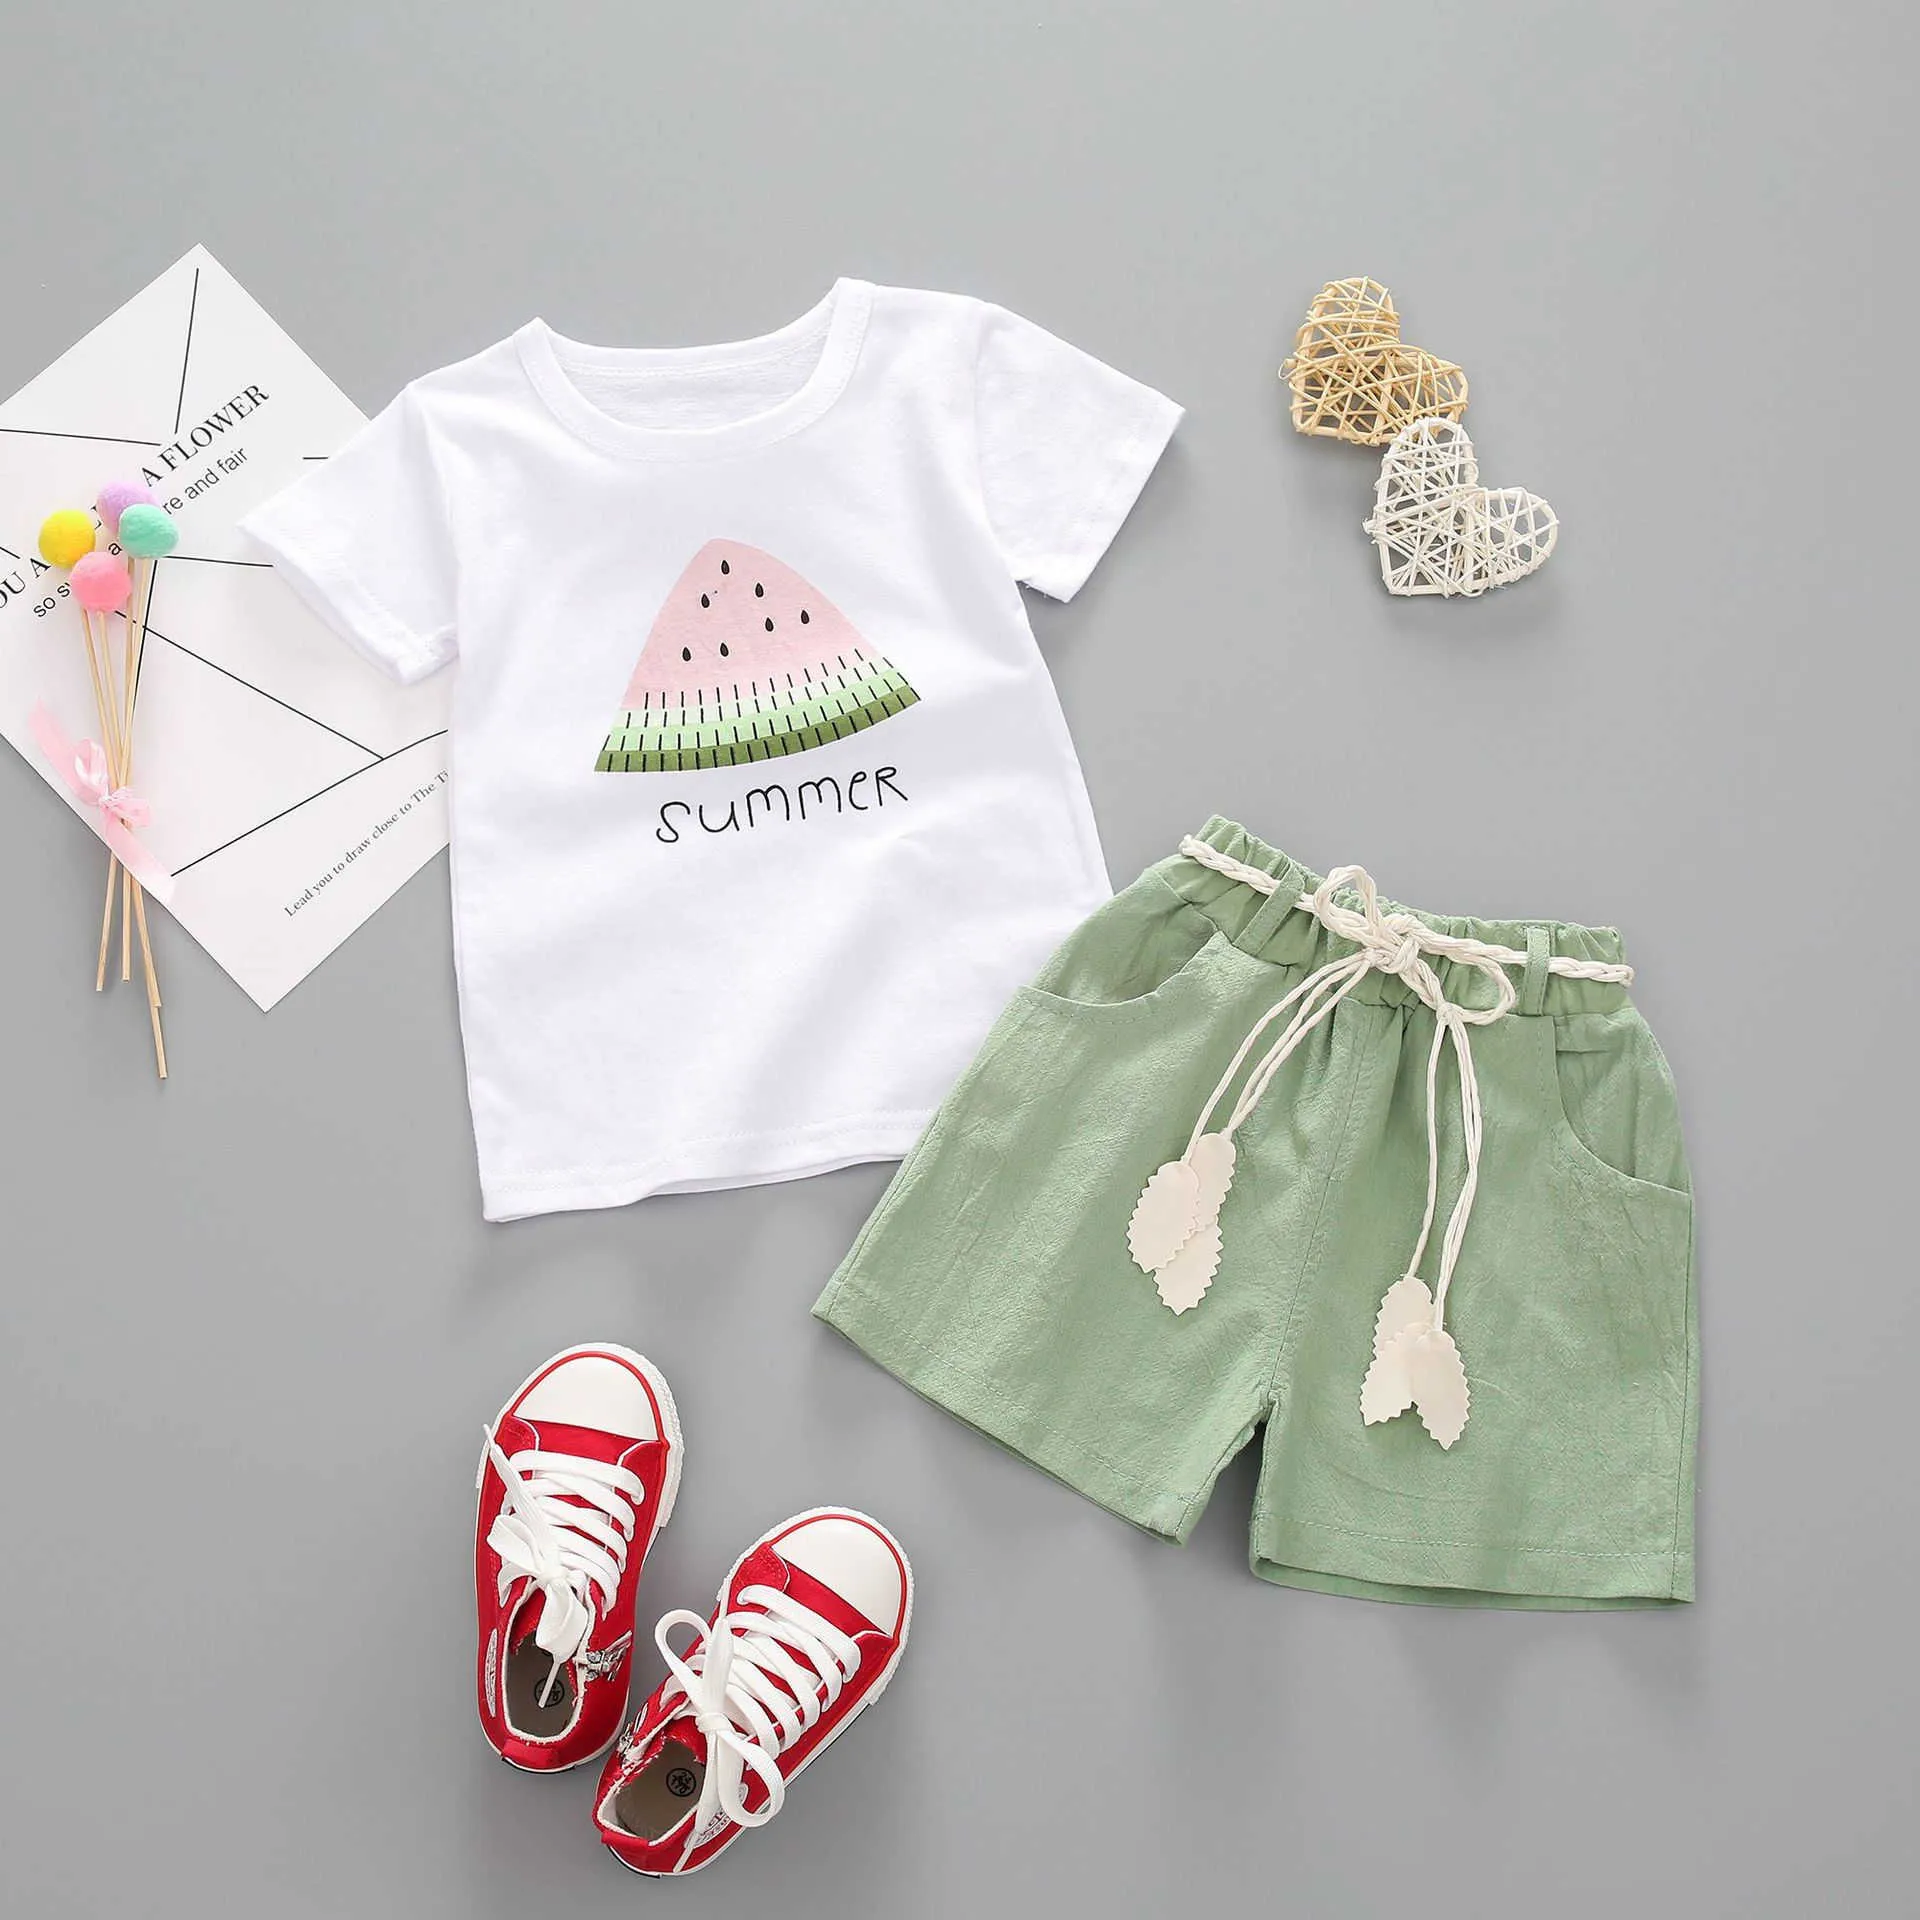 Summer Baby Girl Tshirt Short Sleeve Watermelon Printing Clothes Clothing Cotton Kids Children Sets s Outfits 2108045398634